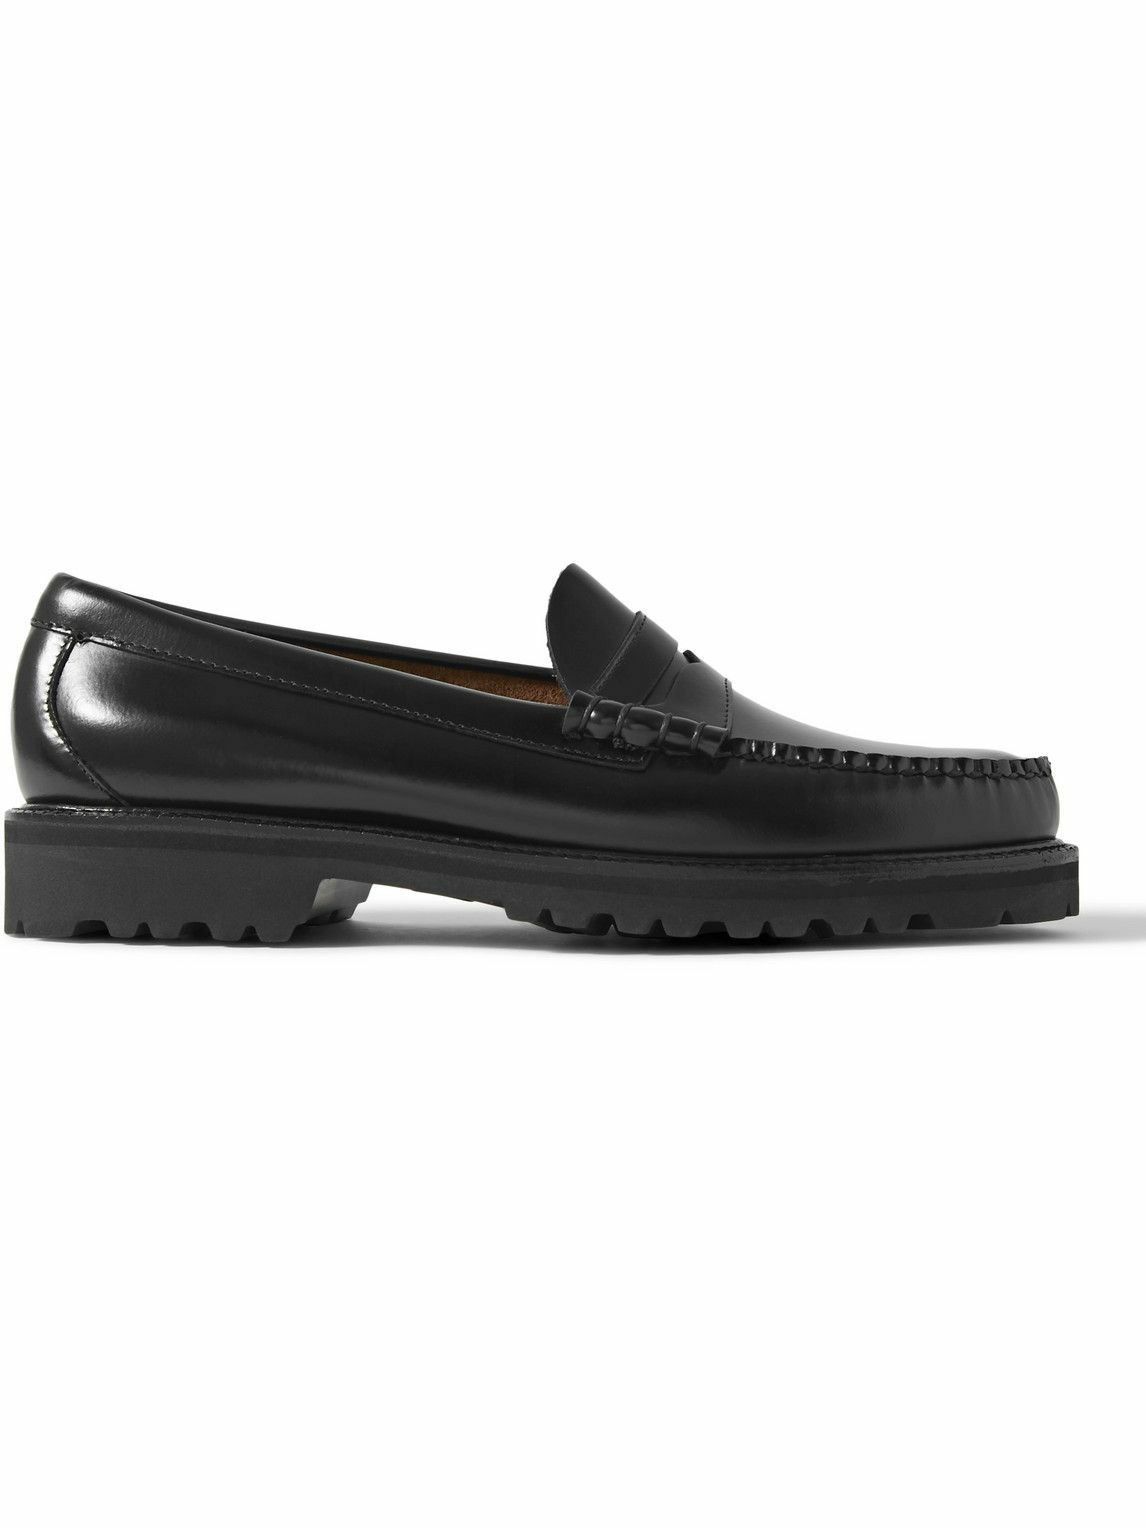 G.H. Bass & Co. - Weejuns 90 Larson Leather Penny Loafers - Black 